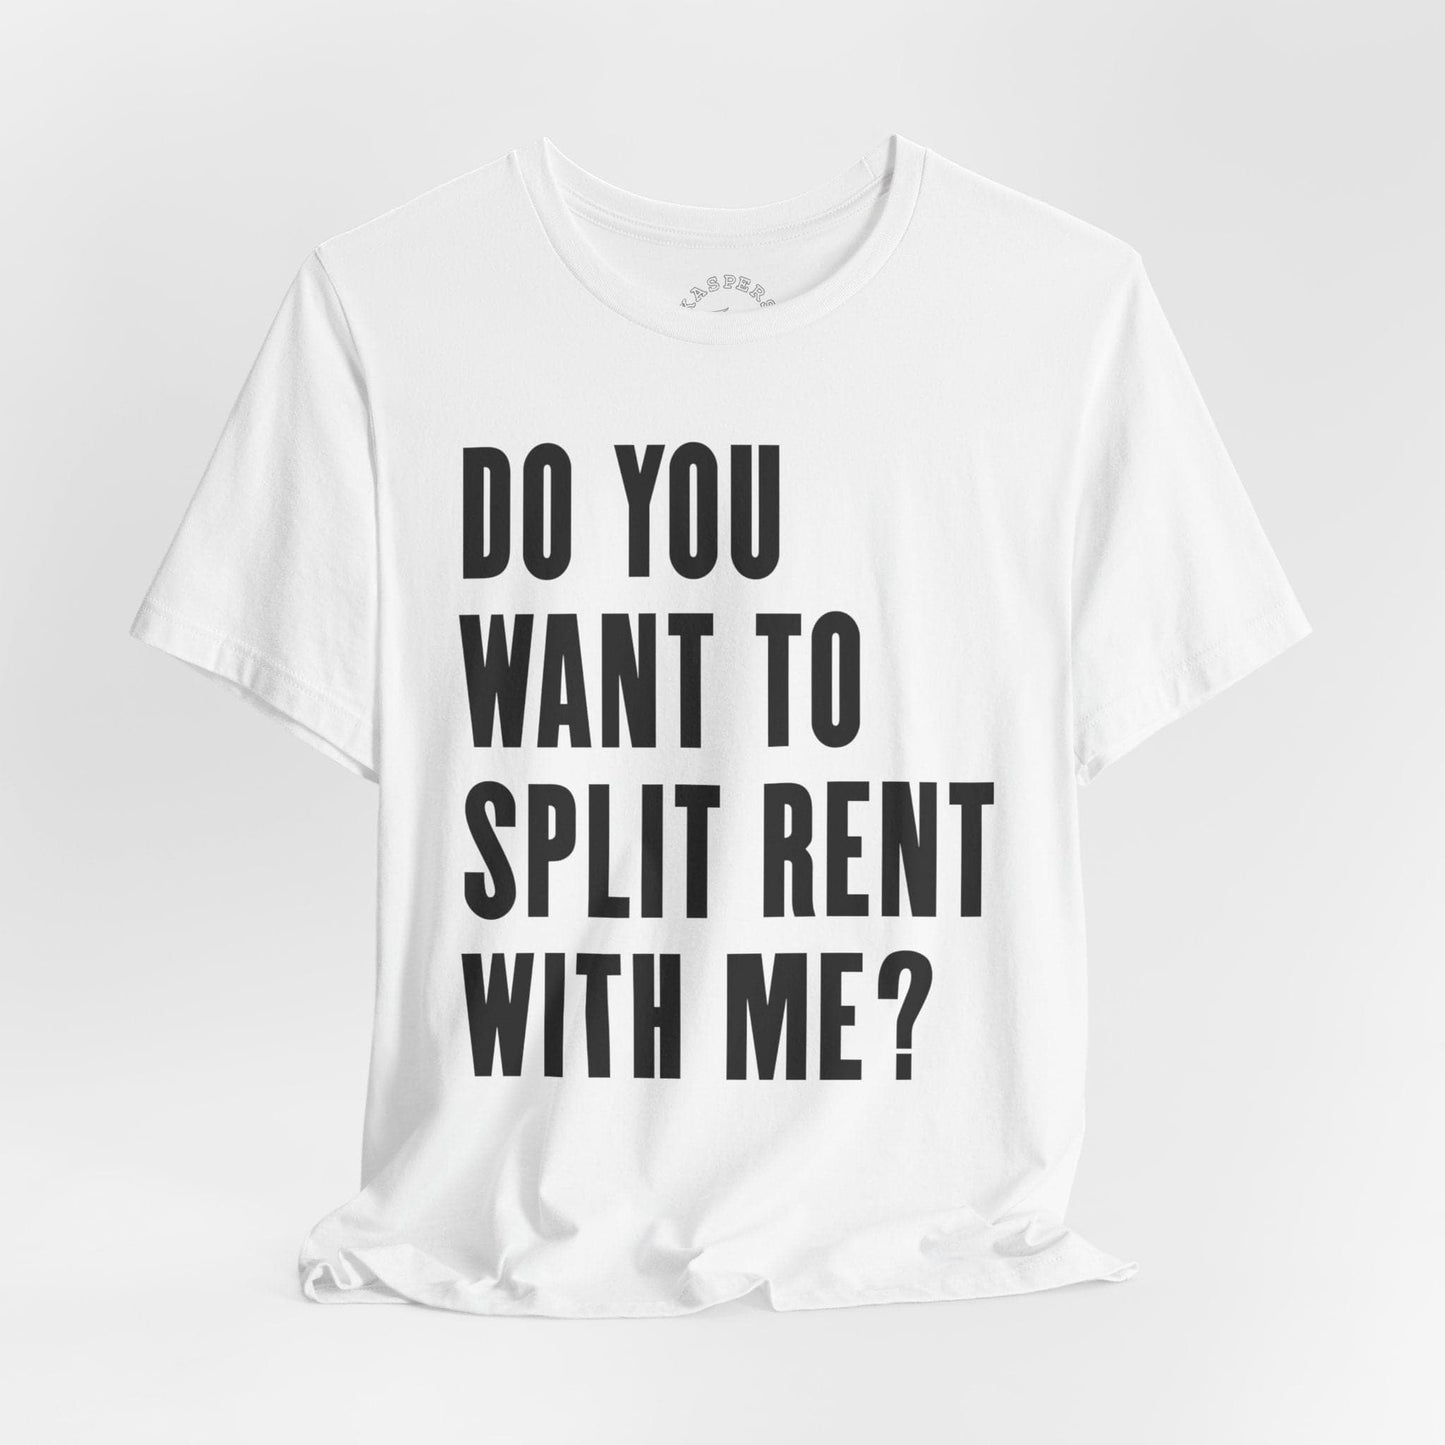 Do You Want To Split Rent With Me? T-Shirt